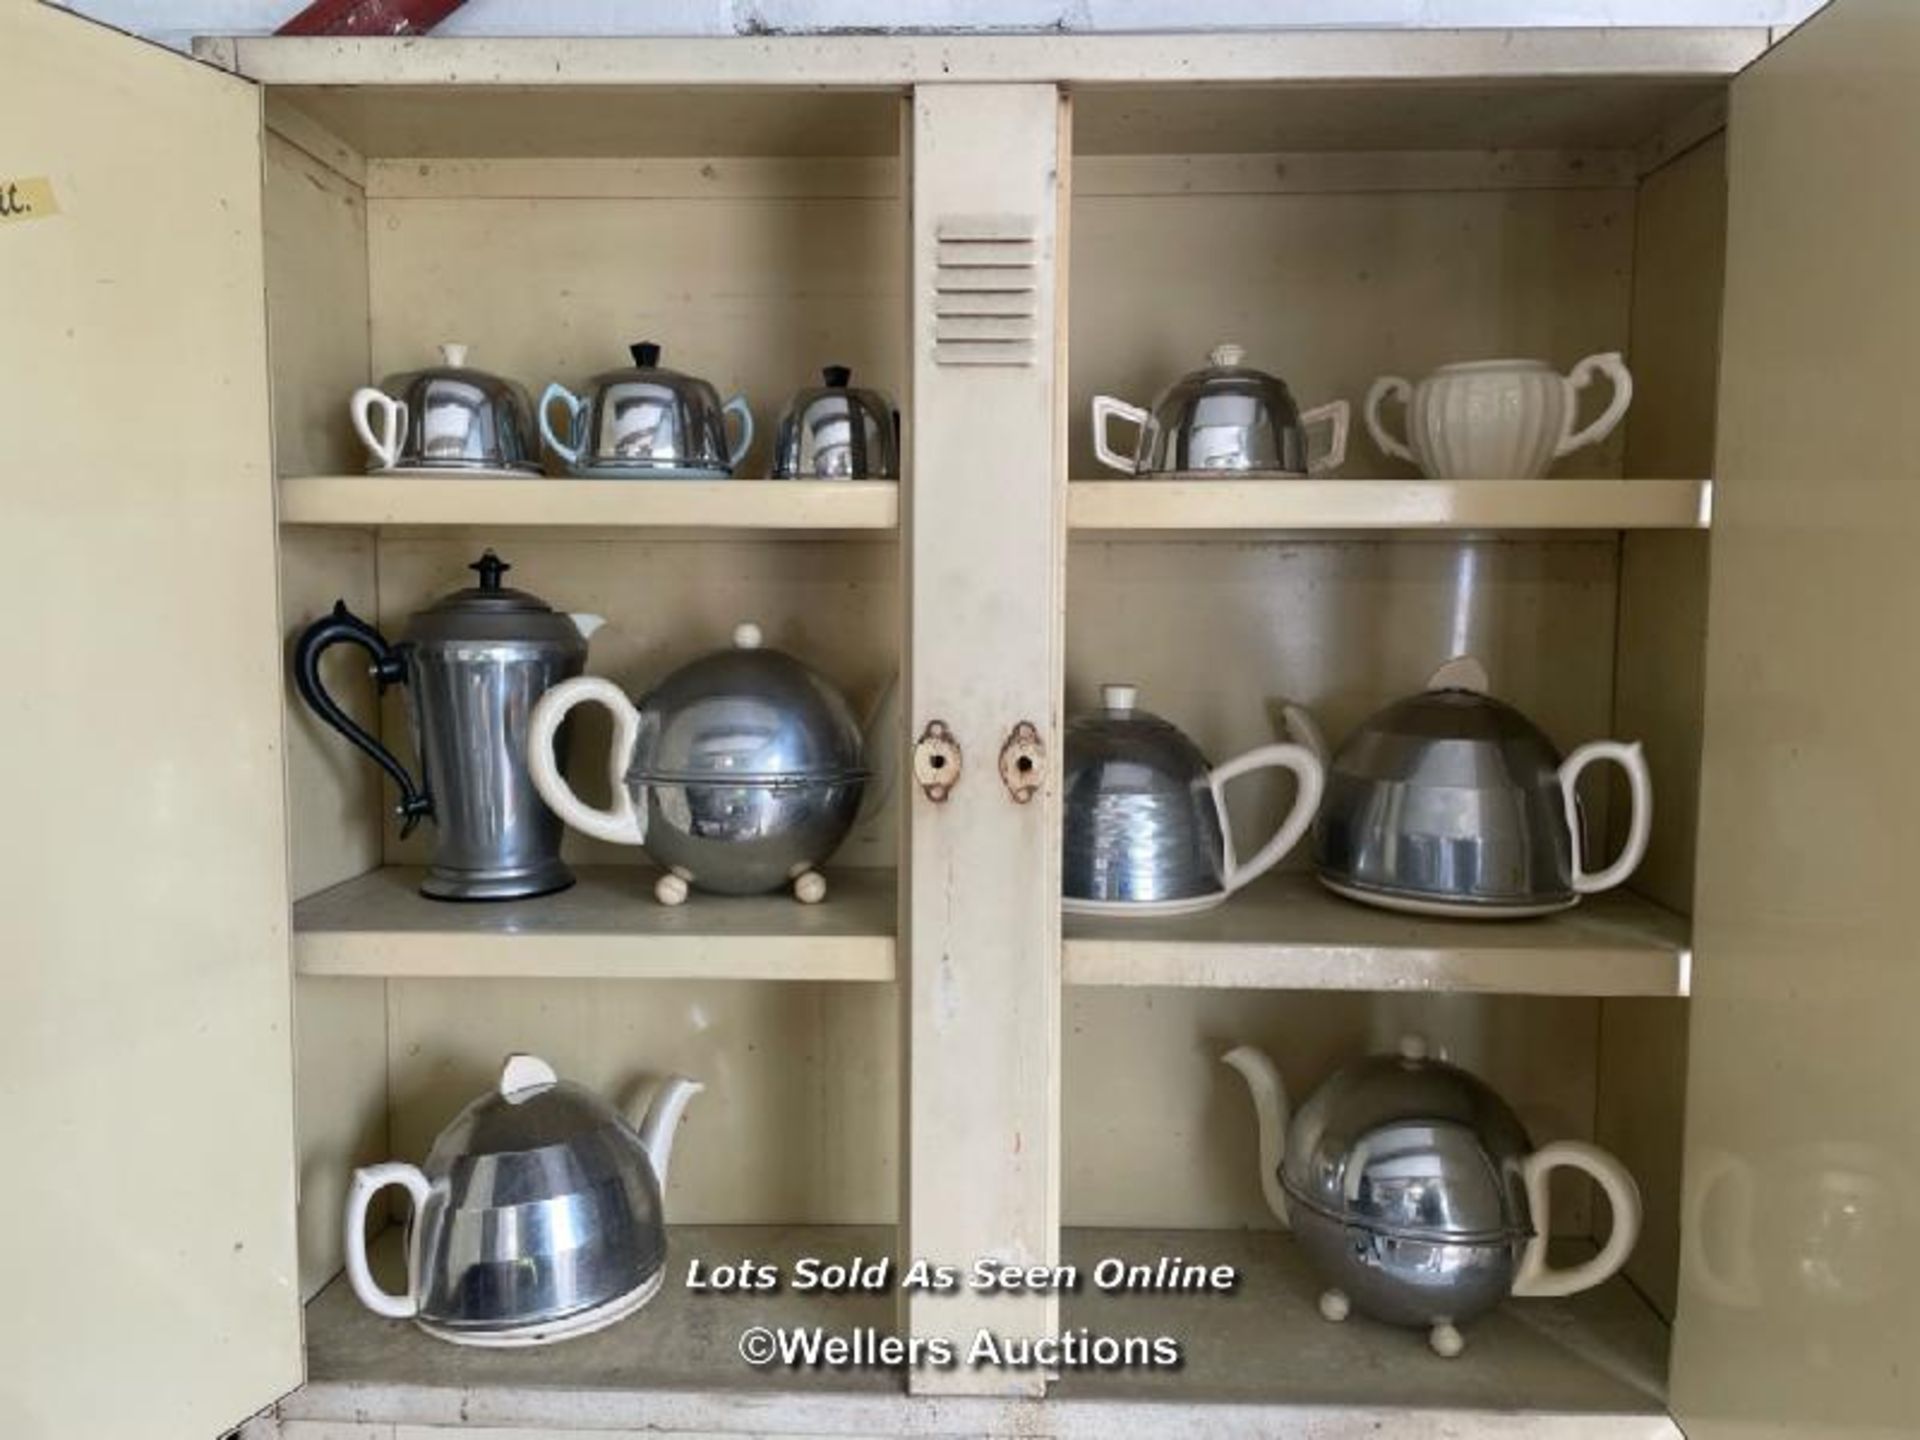 1960'S METAL KITCHEN CABINET, INCL. VARIOUS TEAPOTS AND KETTLES, 187CM (H) X 85CM (W) X 51CM (D) - Image 4 of 4